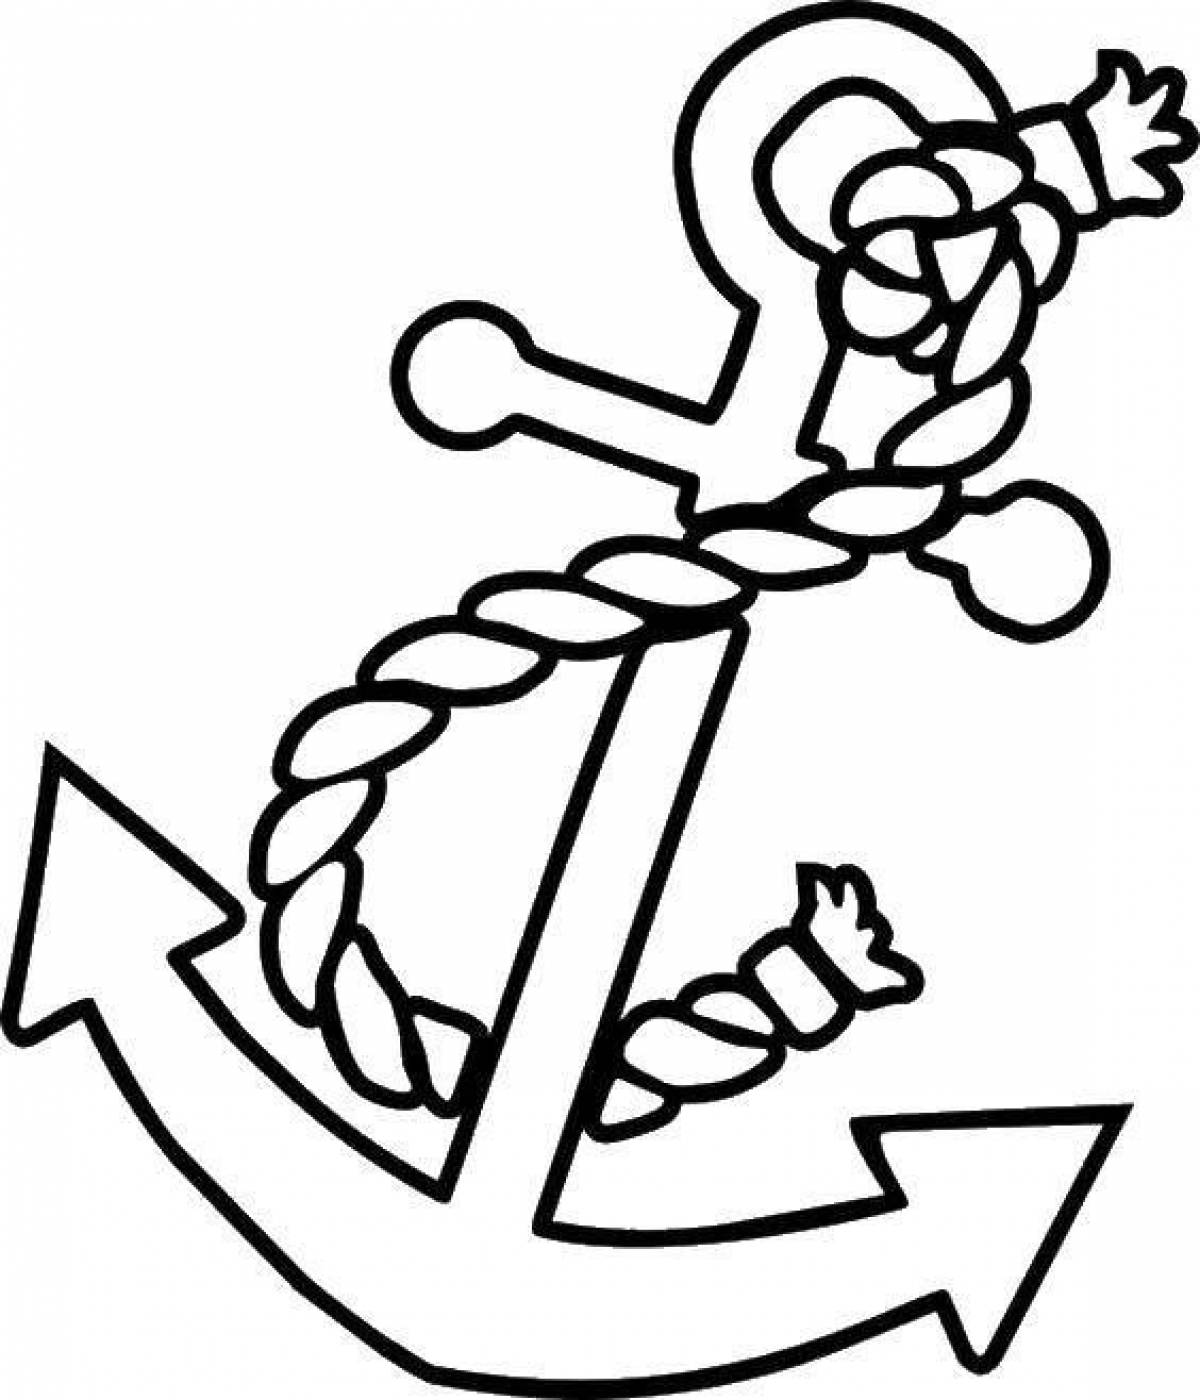 Anchor on a rope